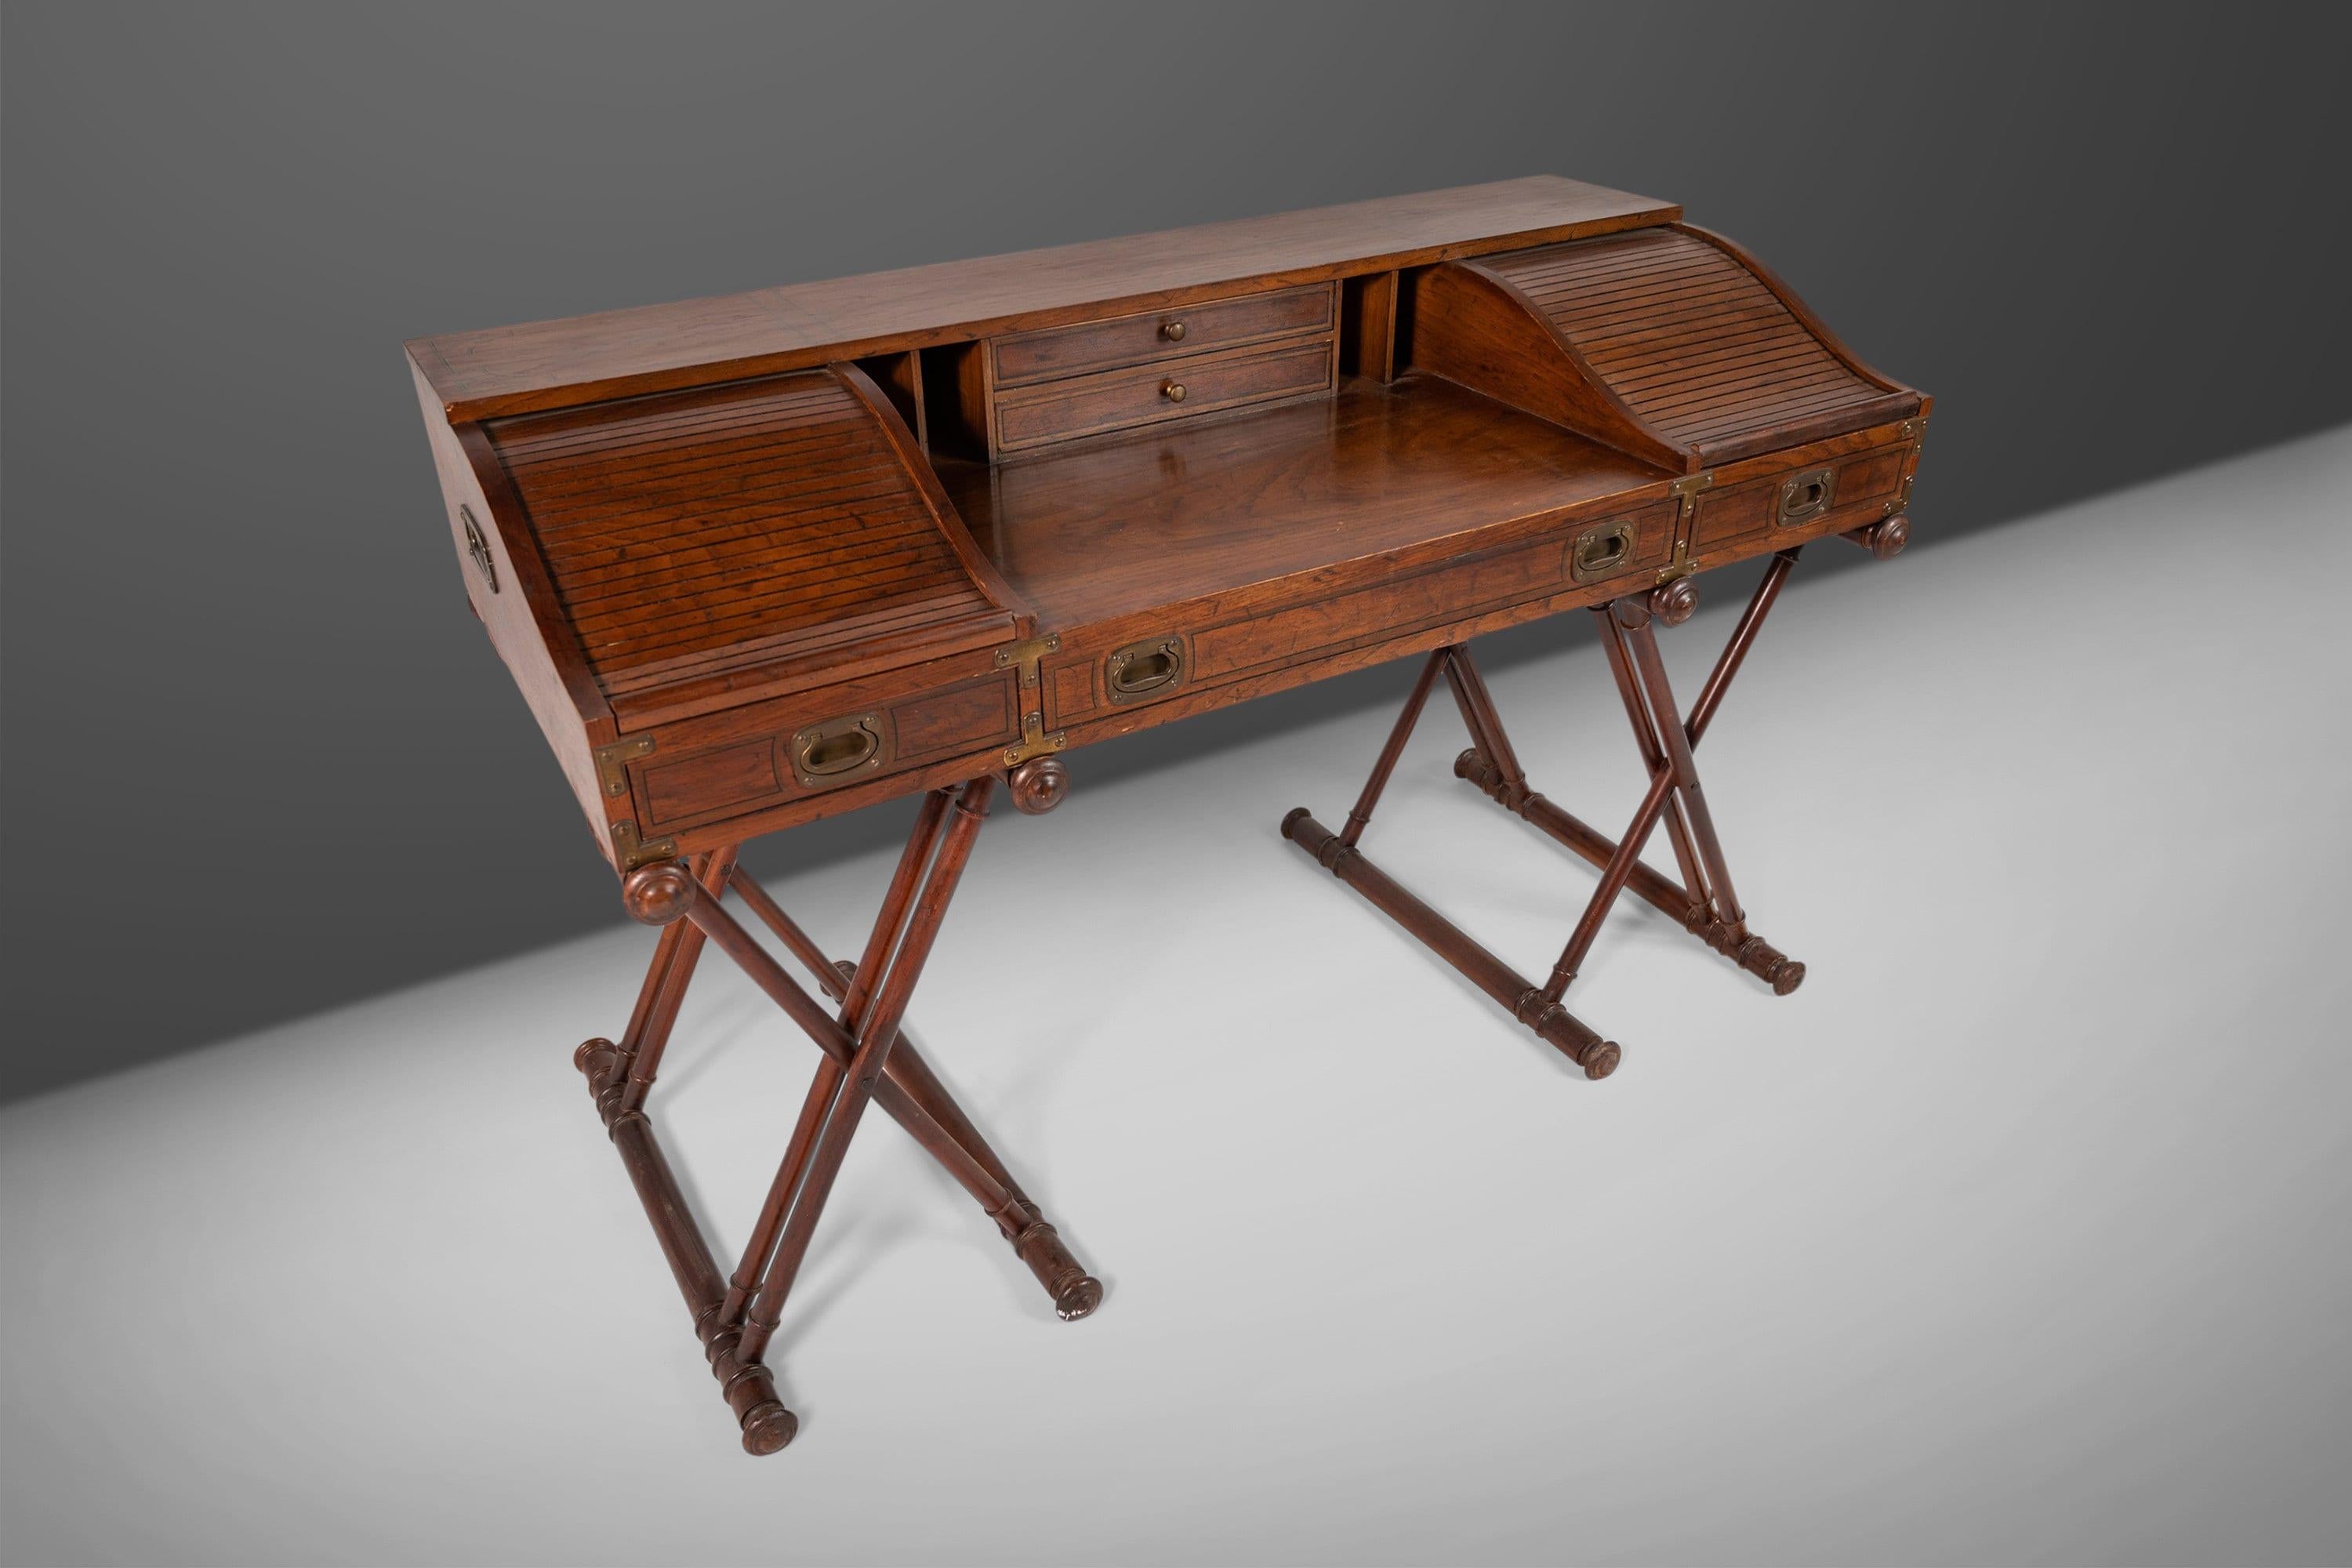 Dazzlingly sumptuous, if a bit boisterous, this campaign style desk was made by Drexel as part of their 'Oxford Square' Collection. It has all of the bells and whistles, and a few surprises too. The overall look of the piece is very British, c. 19th